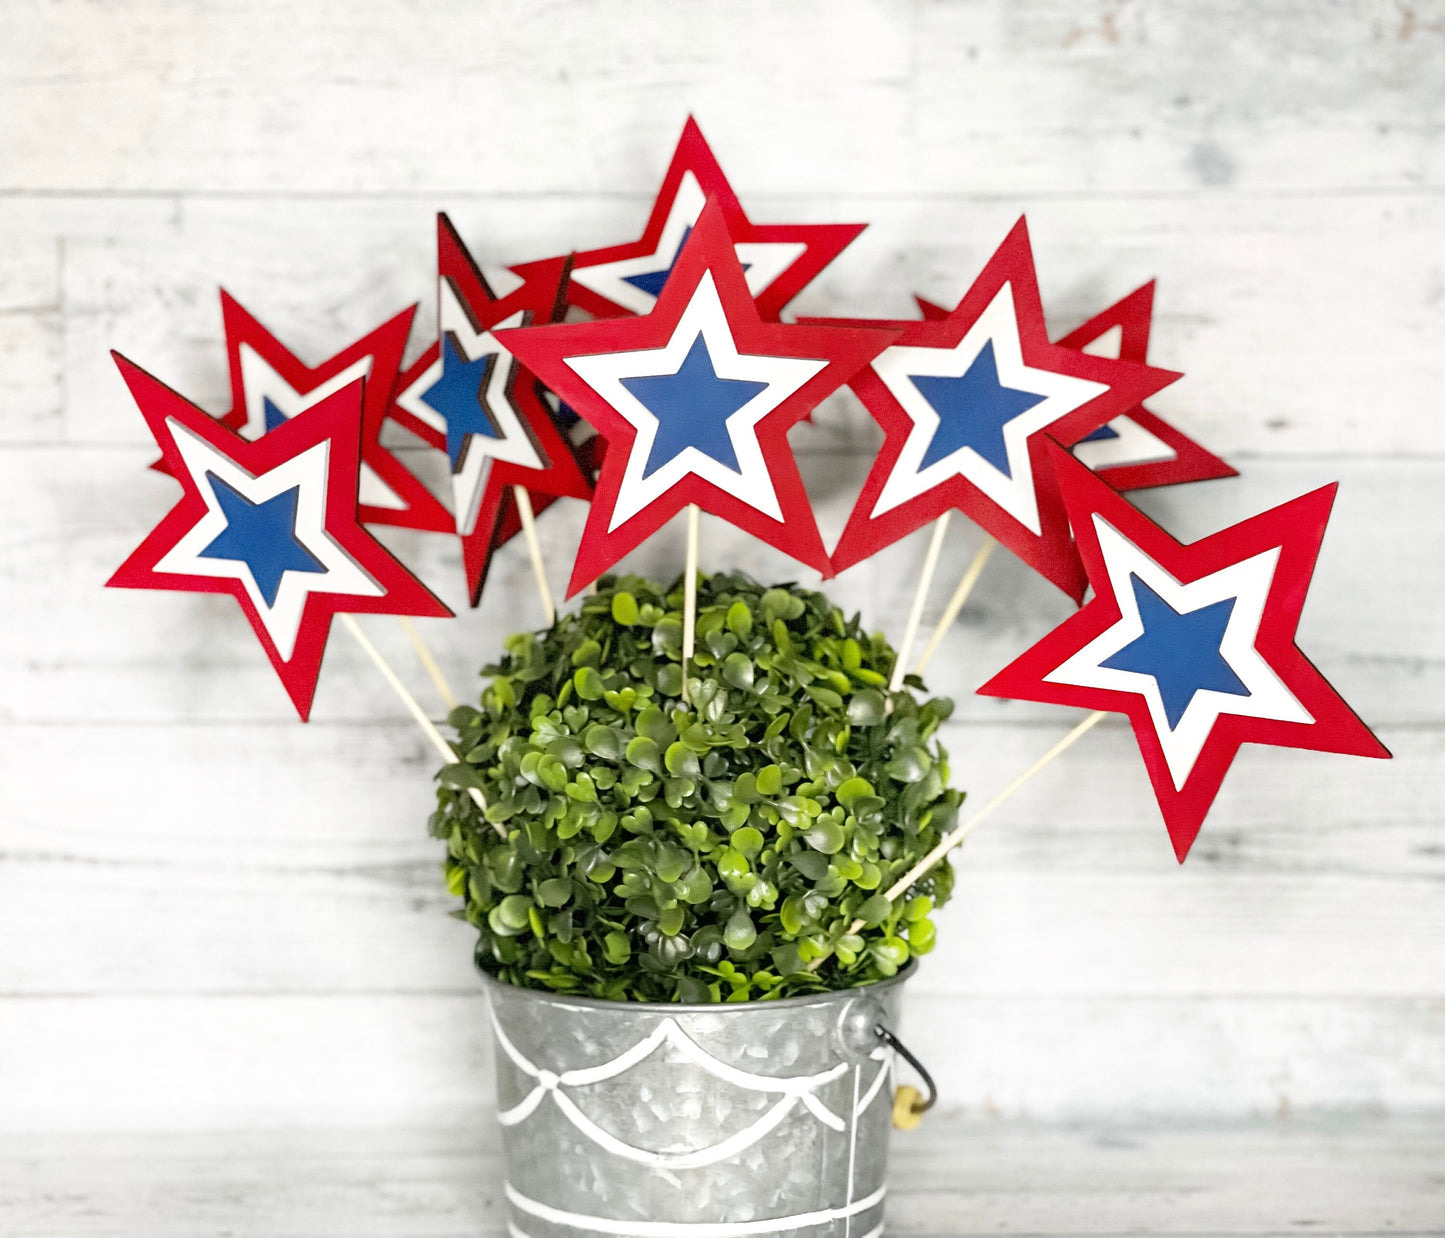 Patriotic Star Picks - 4th of July Decor - Red White and Blue Centerpiece - Independence Day Decorations - Floral Pick